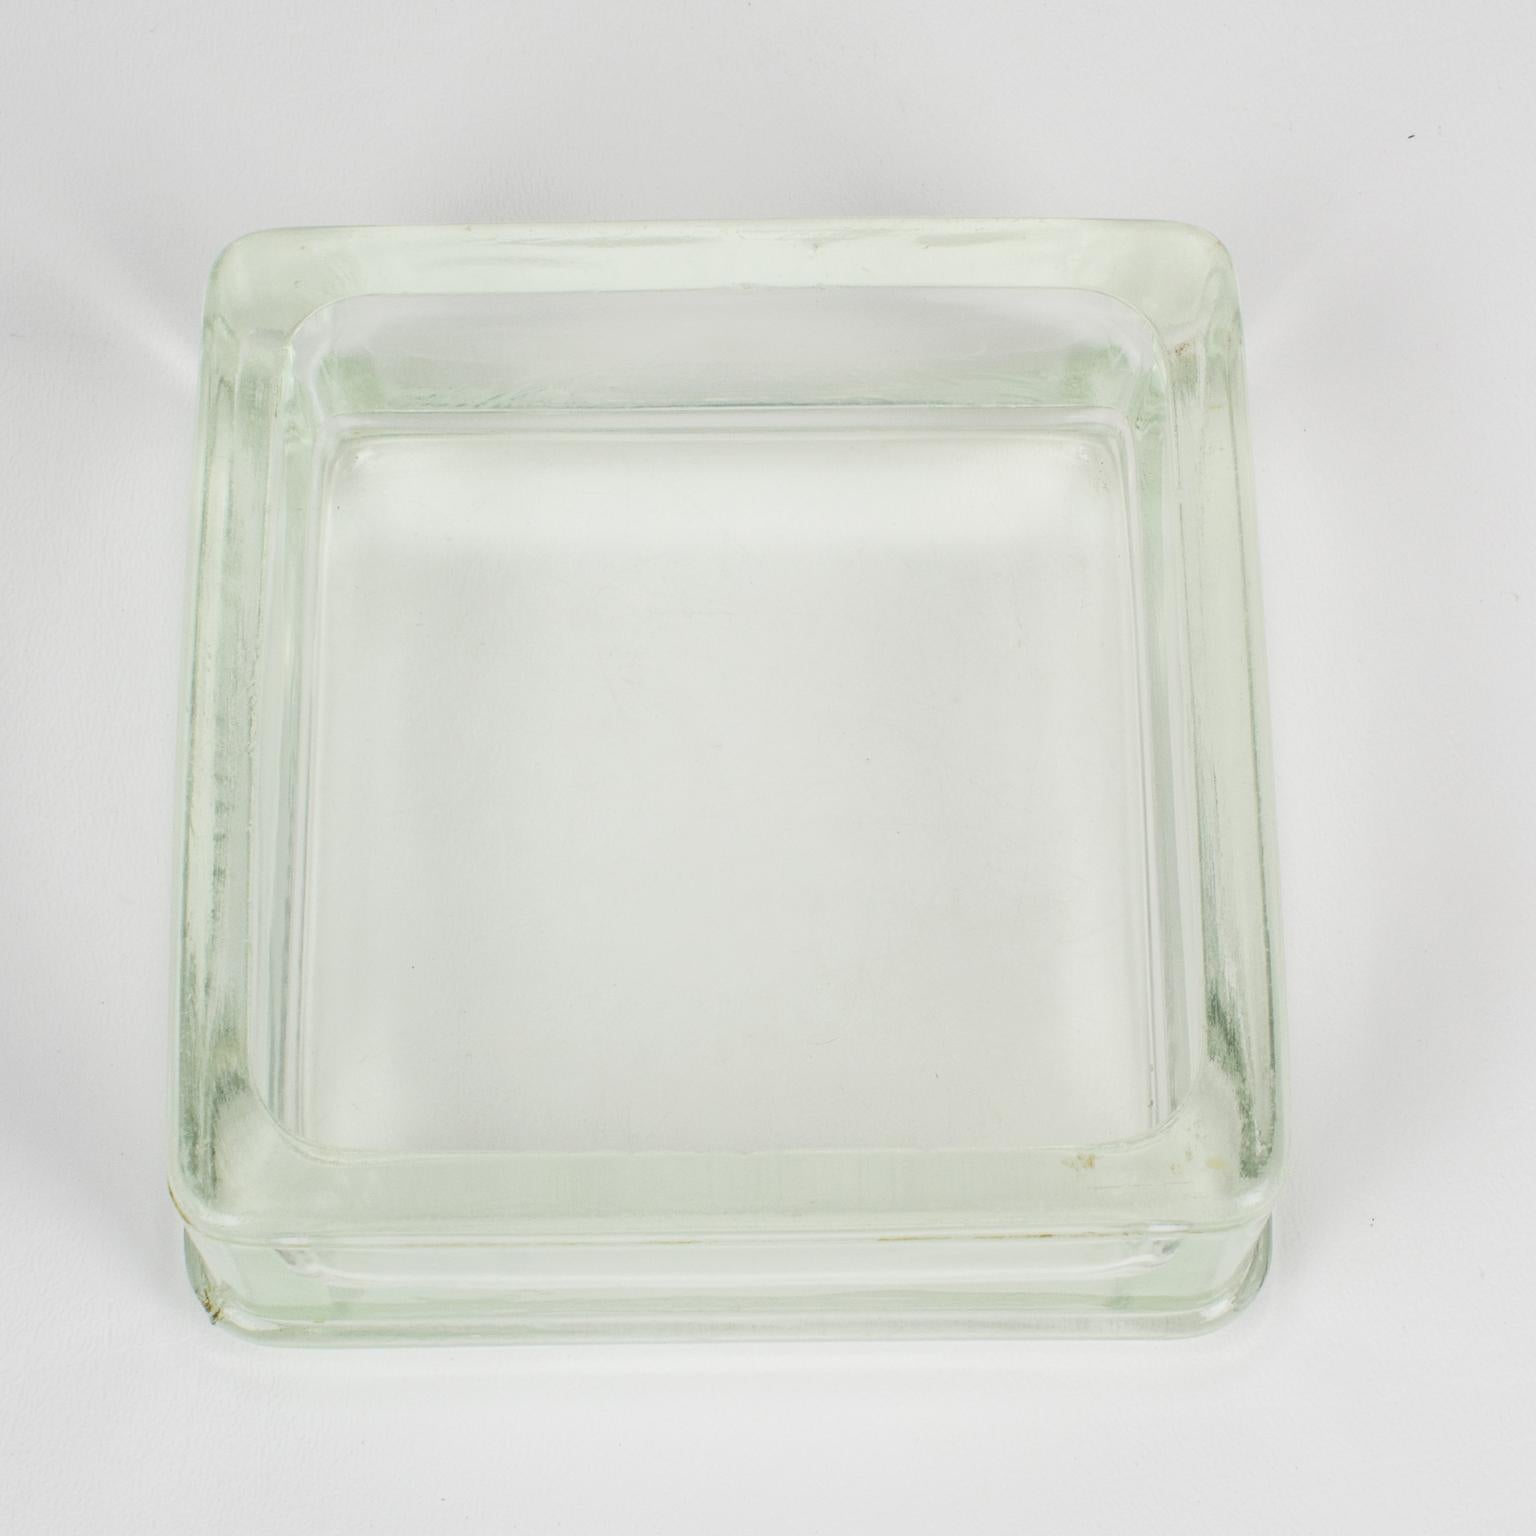 French Designed by Le Corbusier for Lumax Molded Glass Desk Accessory Ashtray Catchall